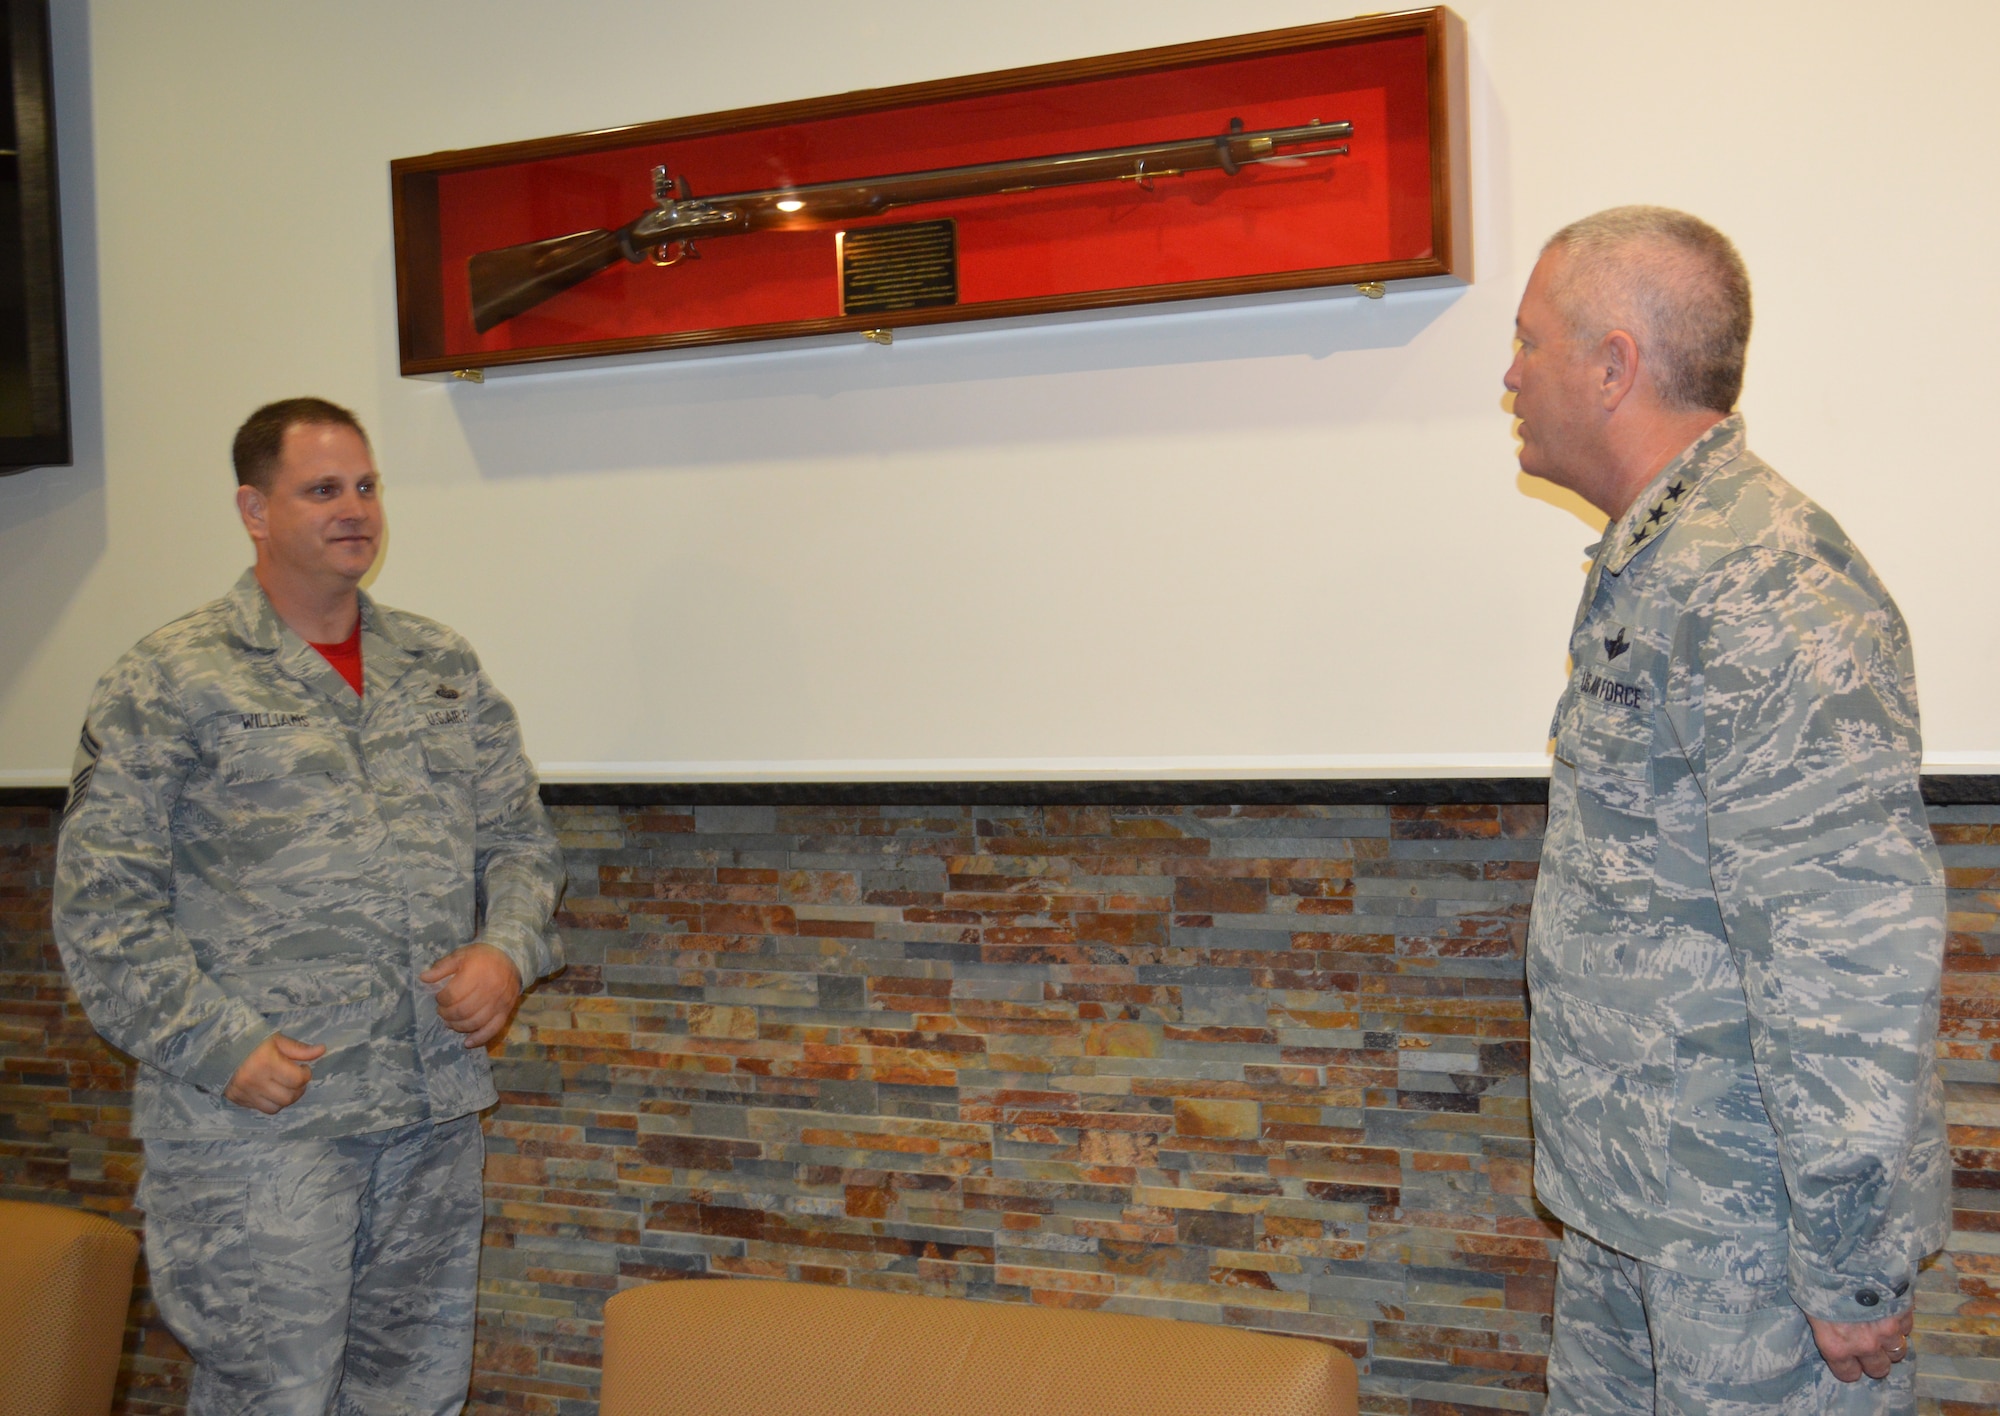 Senior Master Sgt. Paul Williams, Combined Enlisted Association member, listens as Lt. Gen. William Etter, Commander, Continental U.S. North American Aerospace Defense Region-1st Air Force (Air Forces Northern), talks about the newly-presented 1600-era musket displayed in the Heritage Room. The CEA presented the musket to the organization as a tribute to acknowledge the nation’s military heritage and commitment to the defense of freedom. (Photo by Mary McHale)


